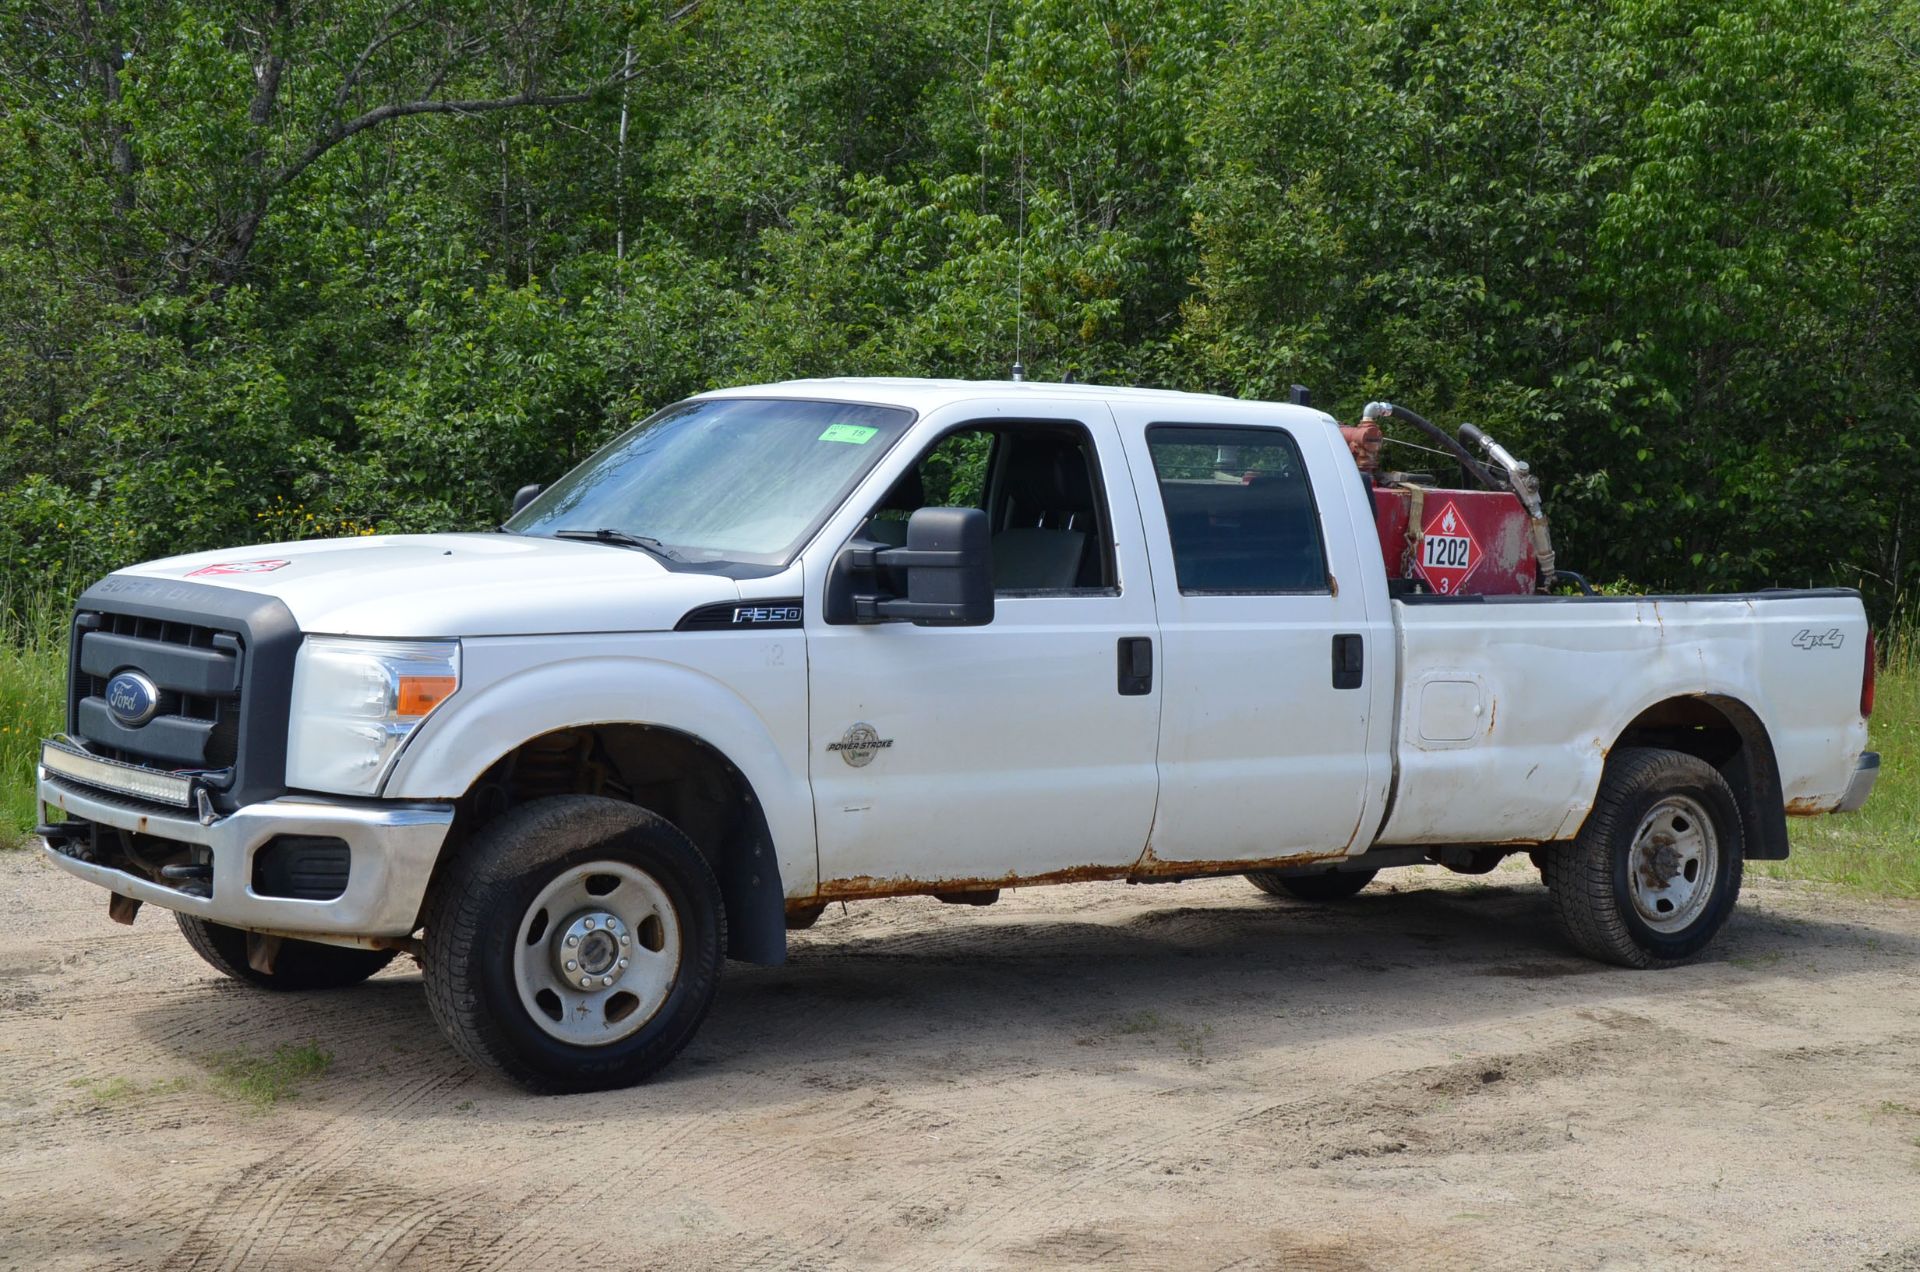 FORD (2012) F350 XLT CREW CAB PICKUP TRUCK WITH POWERSTROKE 6.7LITER TURBO DIESEL ENGINE, AUTO